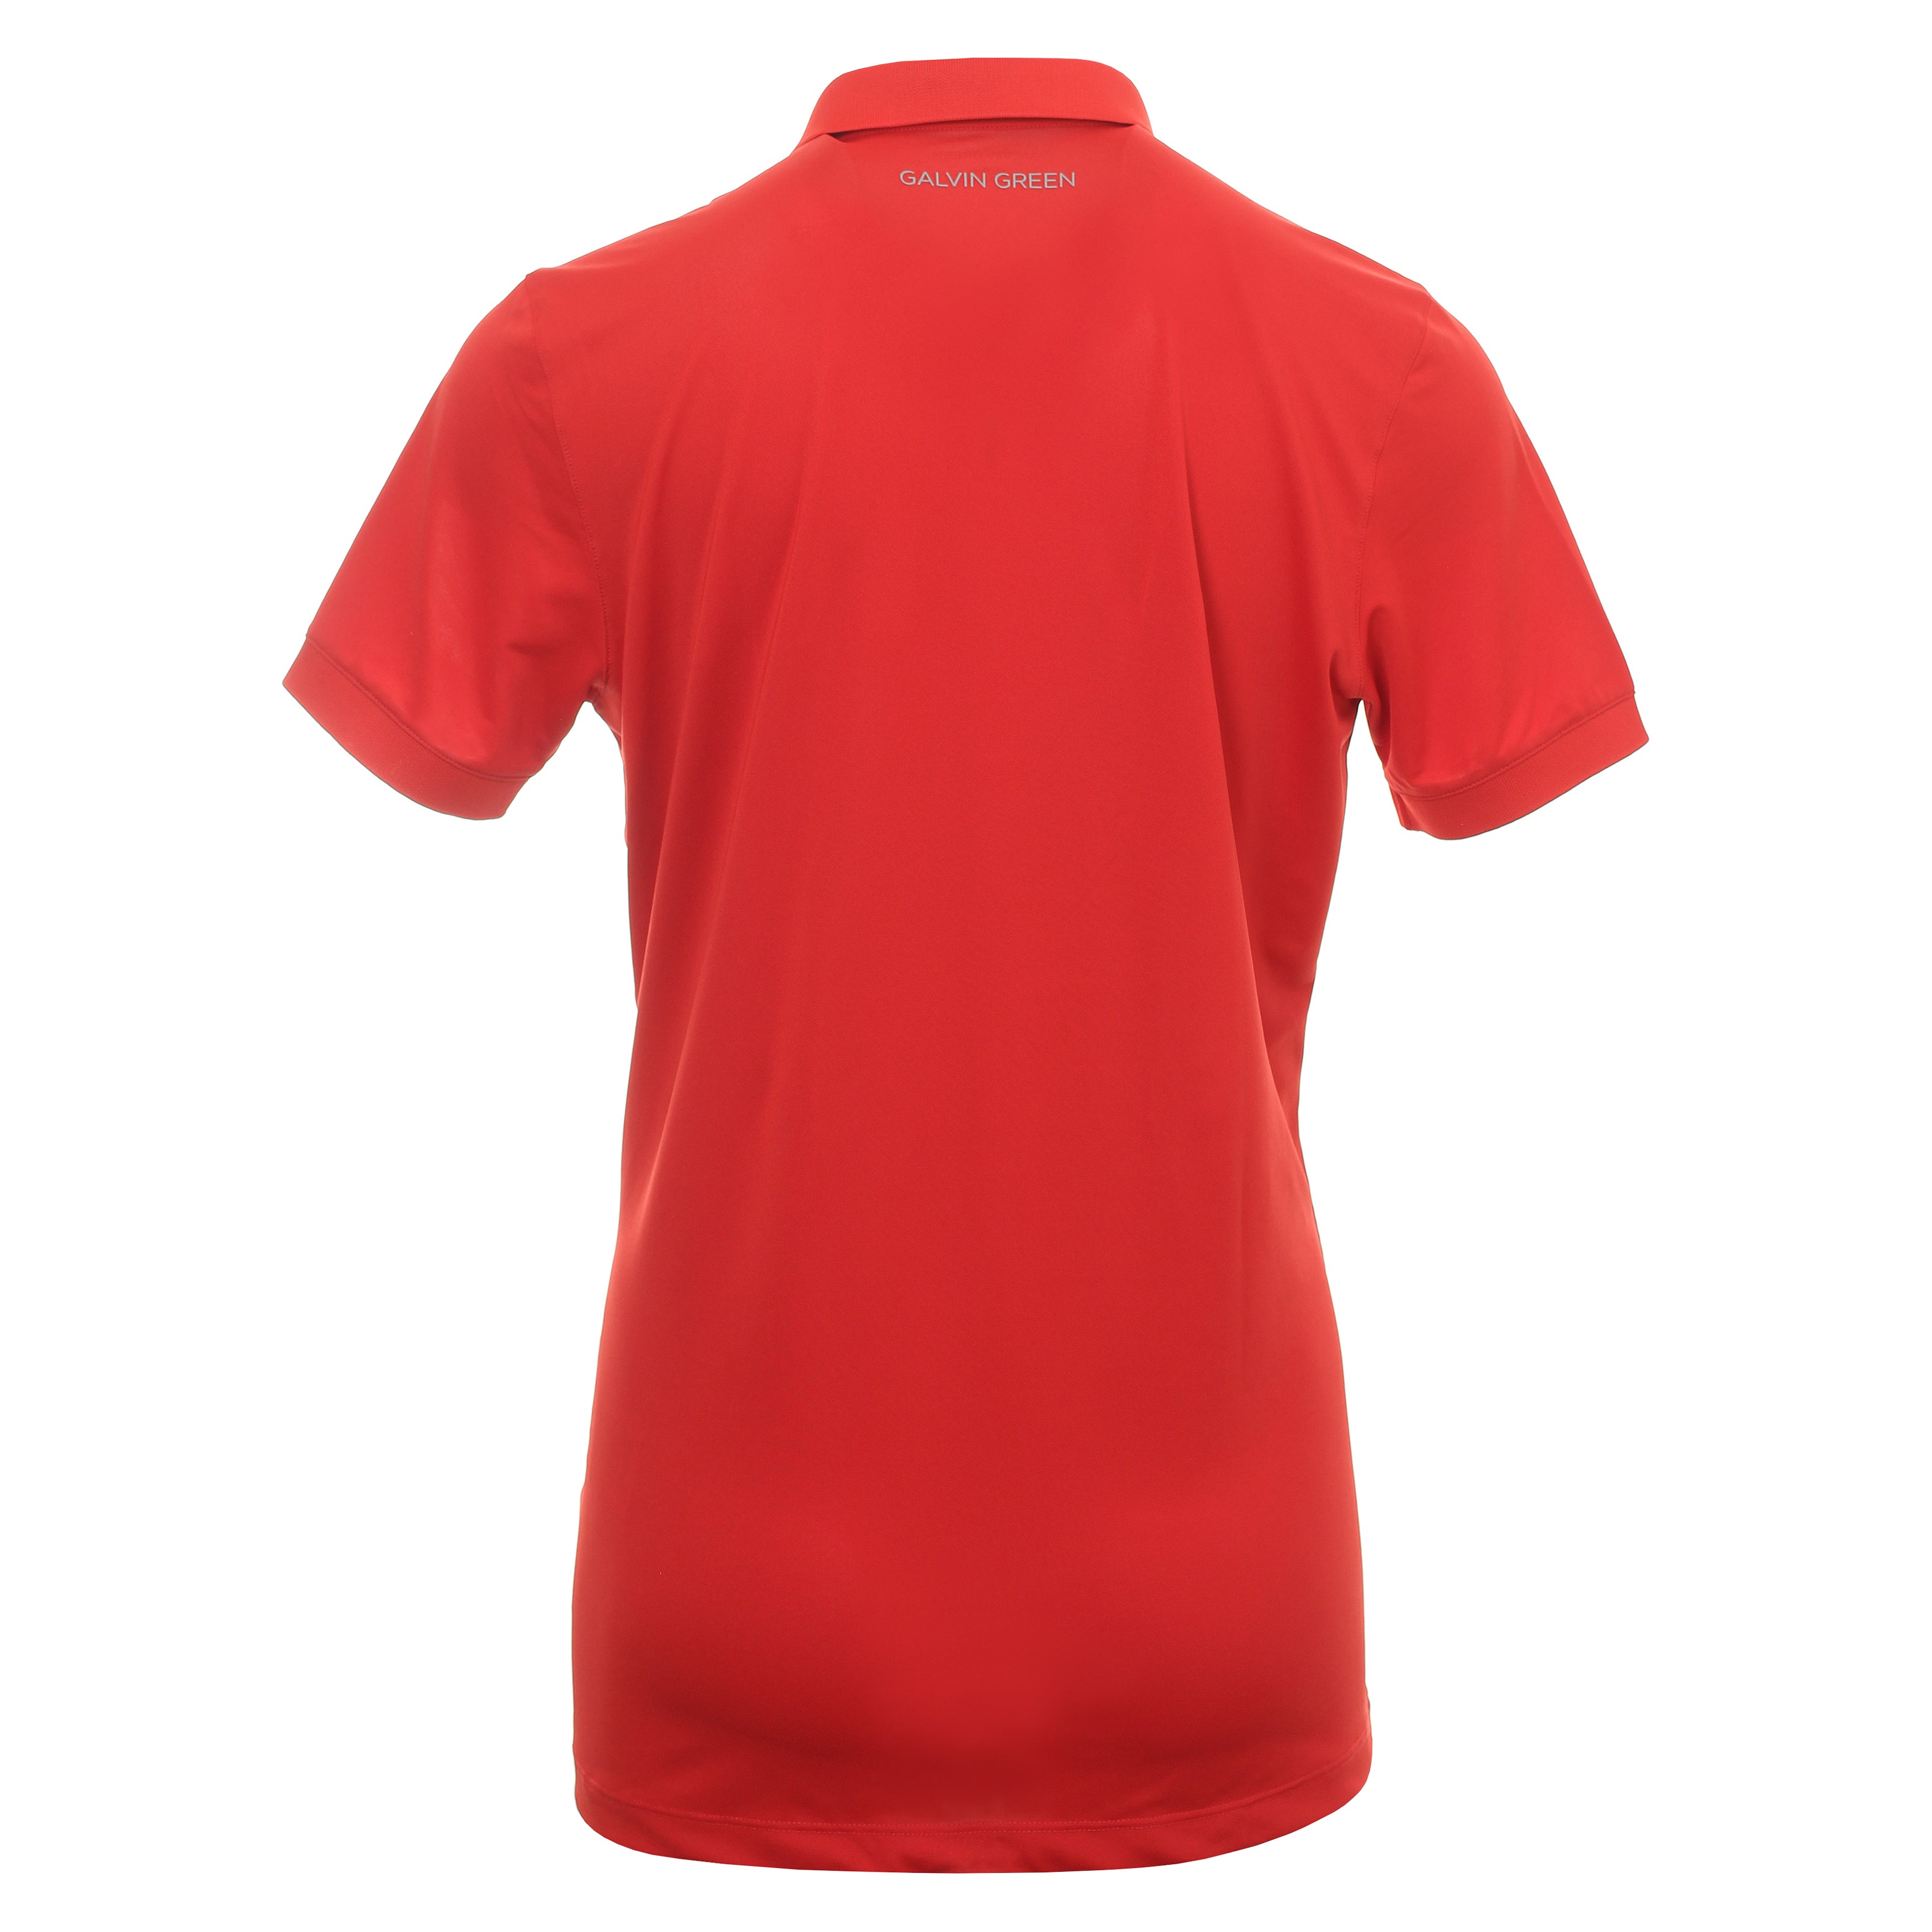 Galvin Green Max Tour Ventil8+ Golf Shirt Red 9413 | Function18 ...